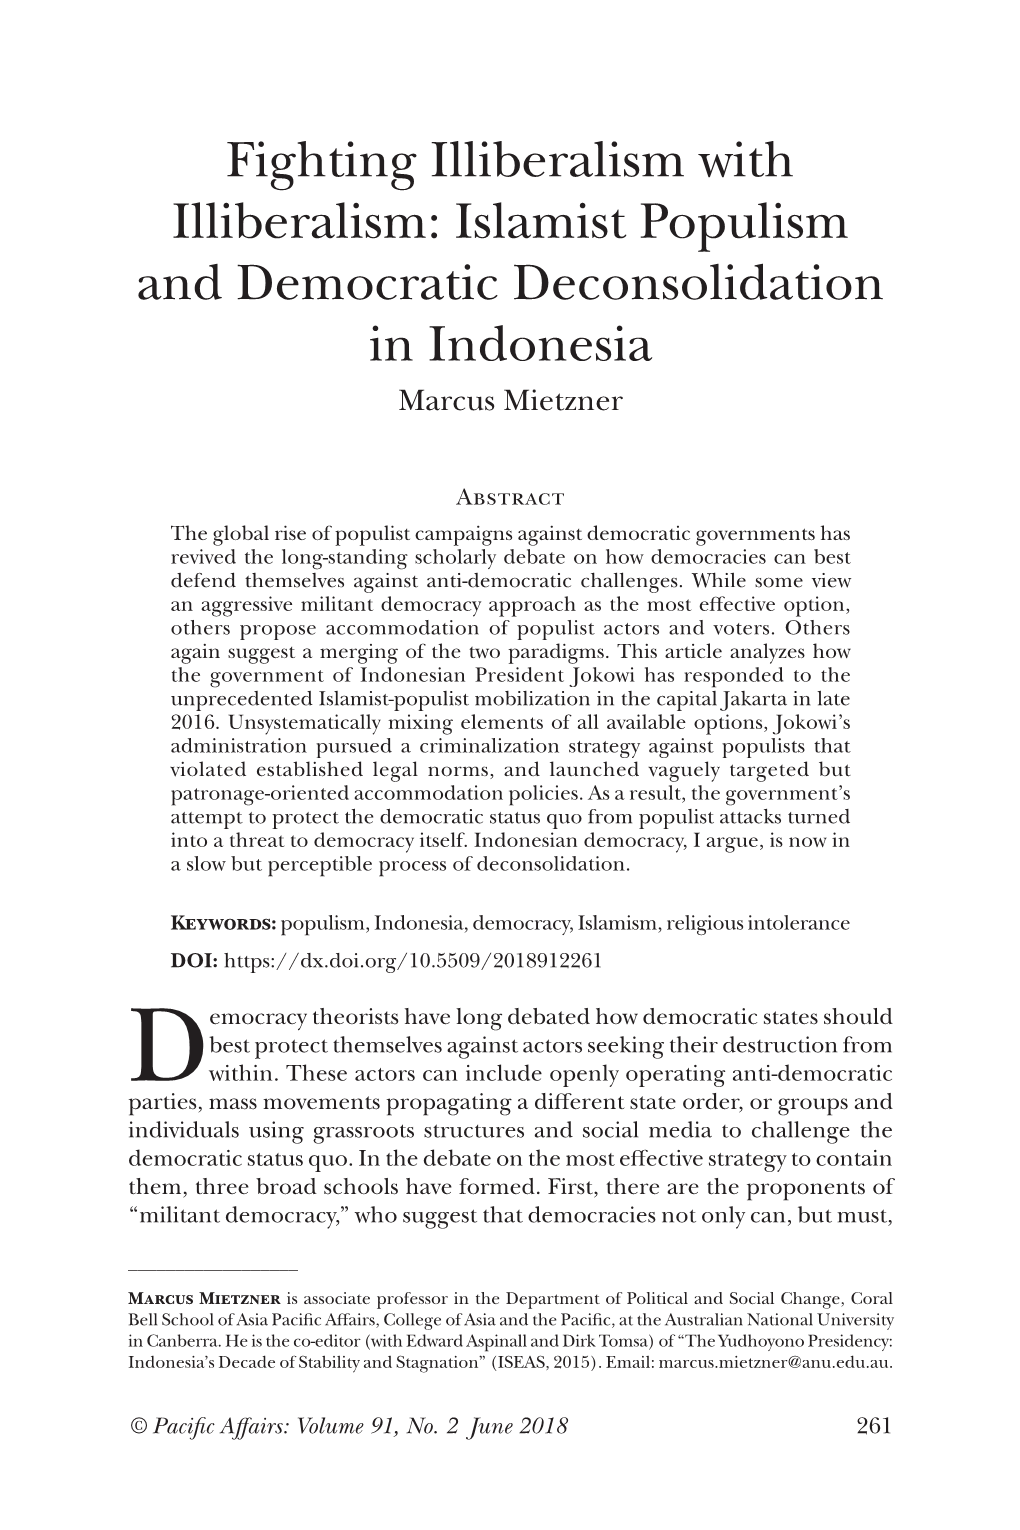 Islamist Populism and Democratic Deconsolidation in Indonesia Marcus Mietzner